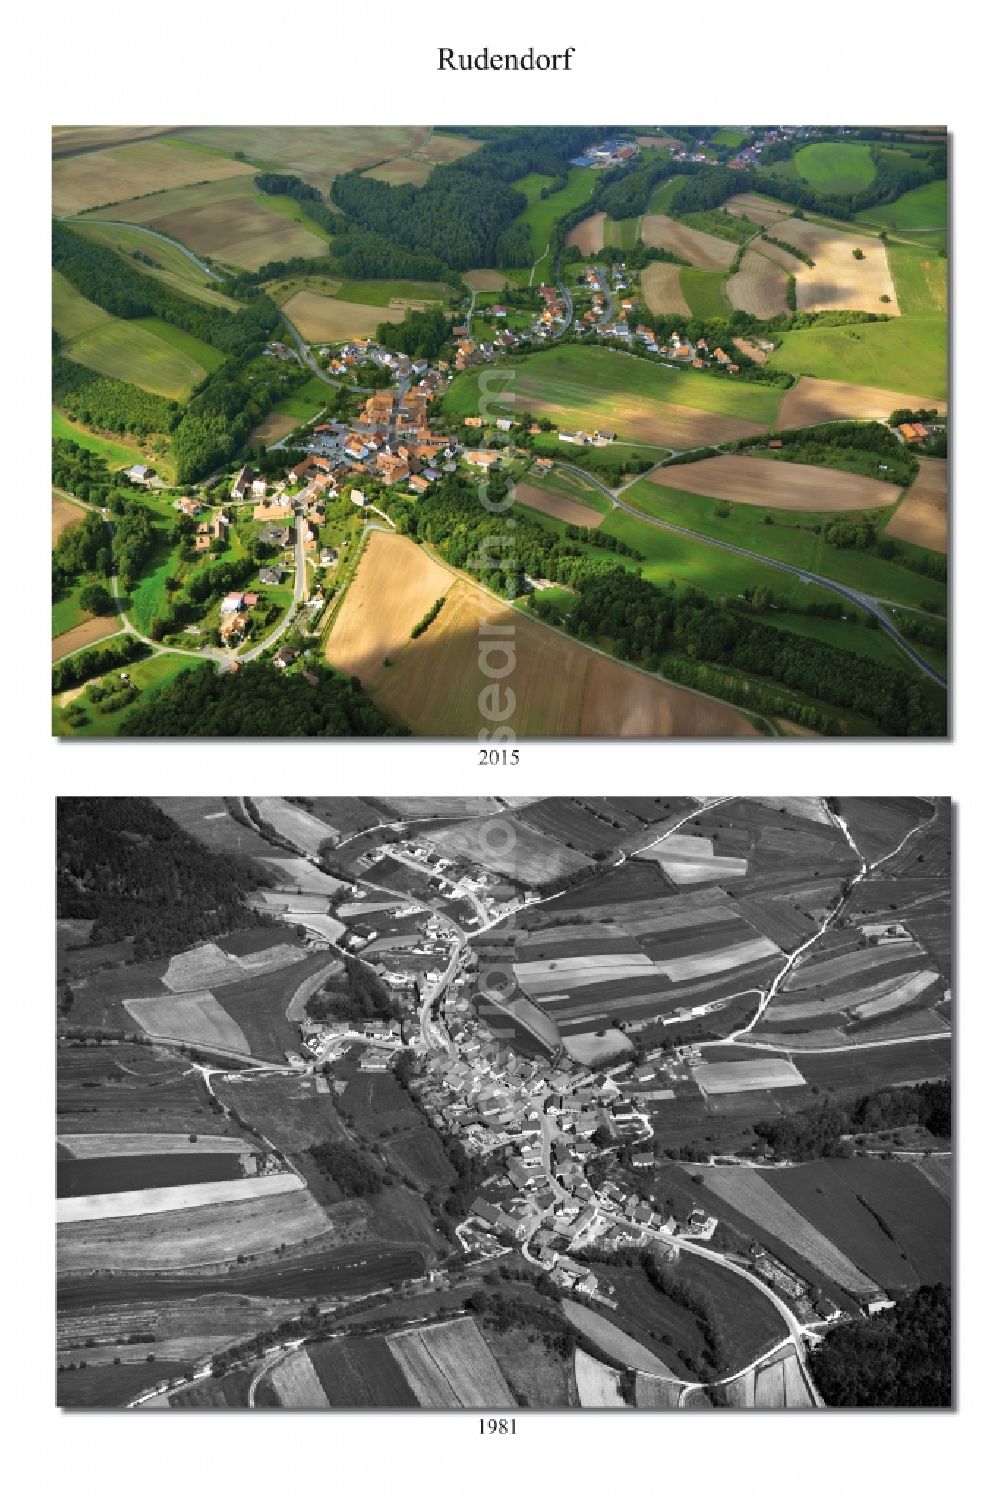 Aerial image Rudendorf - 1981 and 2015 village - view change of Rudendorf in the state Bavaria